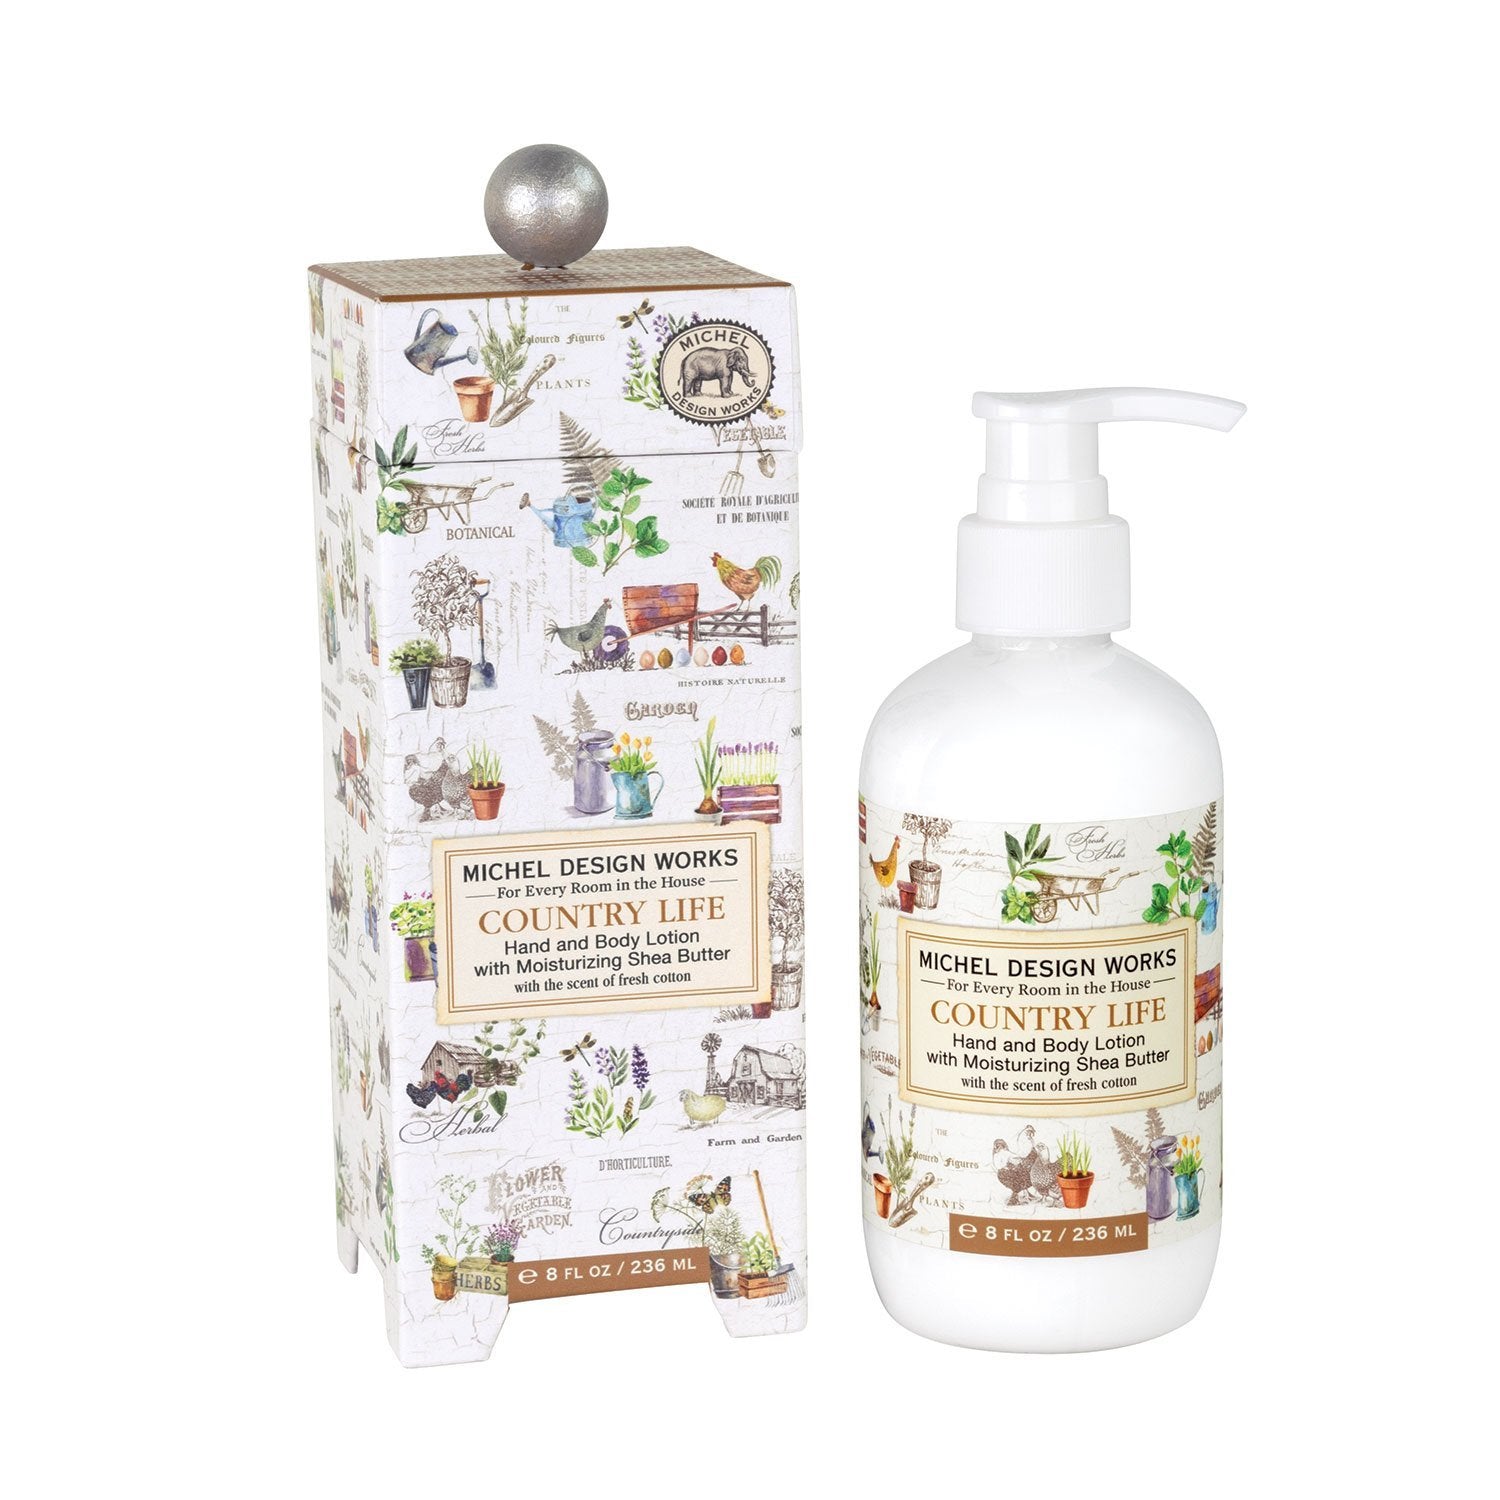 Country Life - Hand and Body Lotion with Shea Butter    